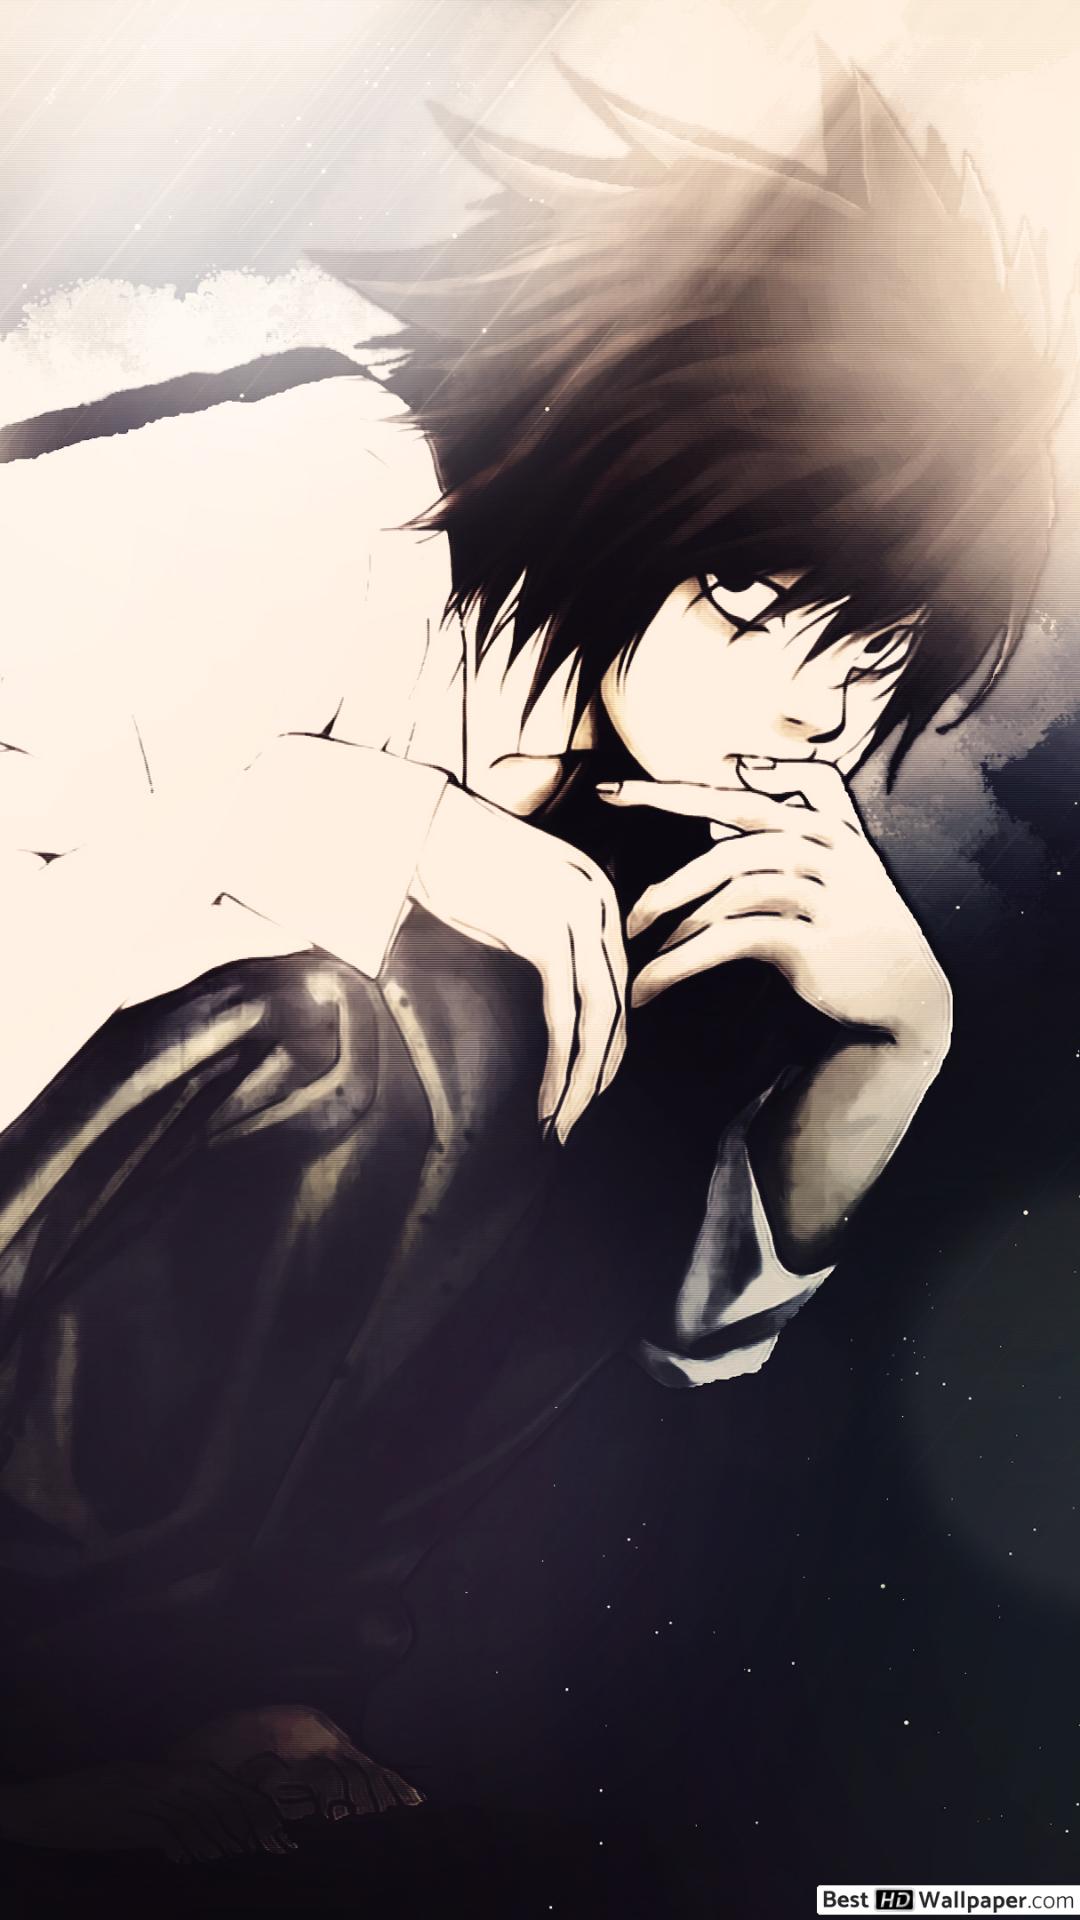 Death Note 1080x1920 Wallpaper Teahub Io The great collection of death note wallpaper iphone for desktop, laptop and mobiles. death note 1080x1920 wallpaper